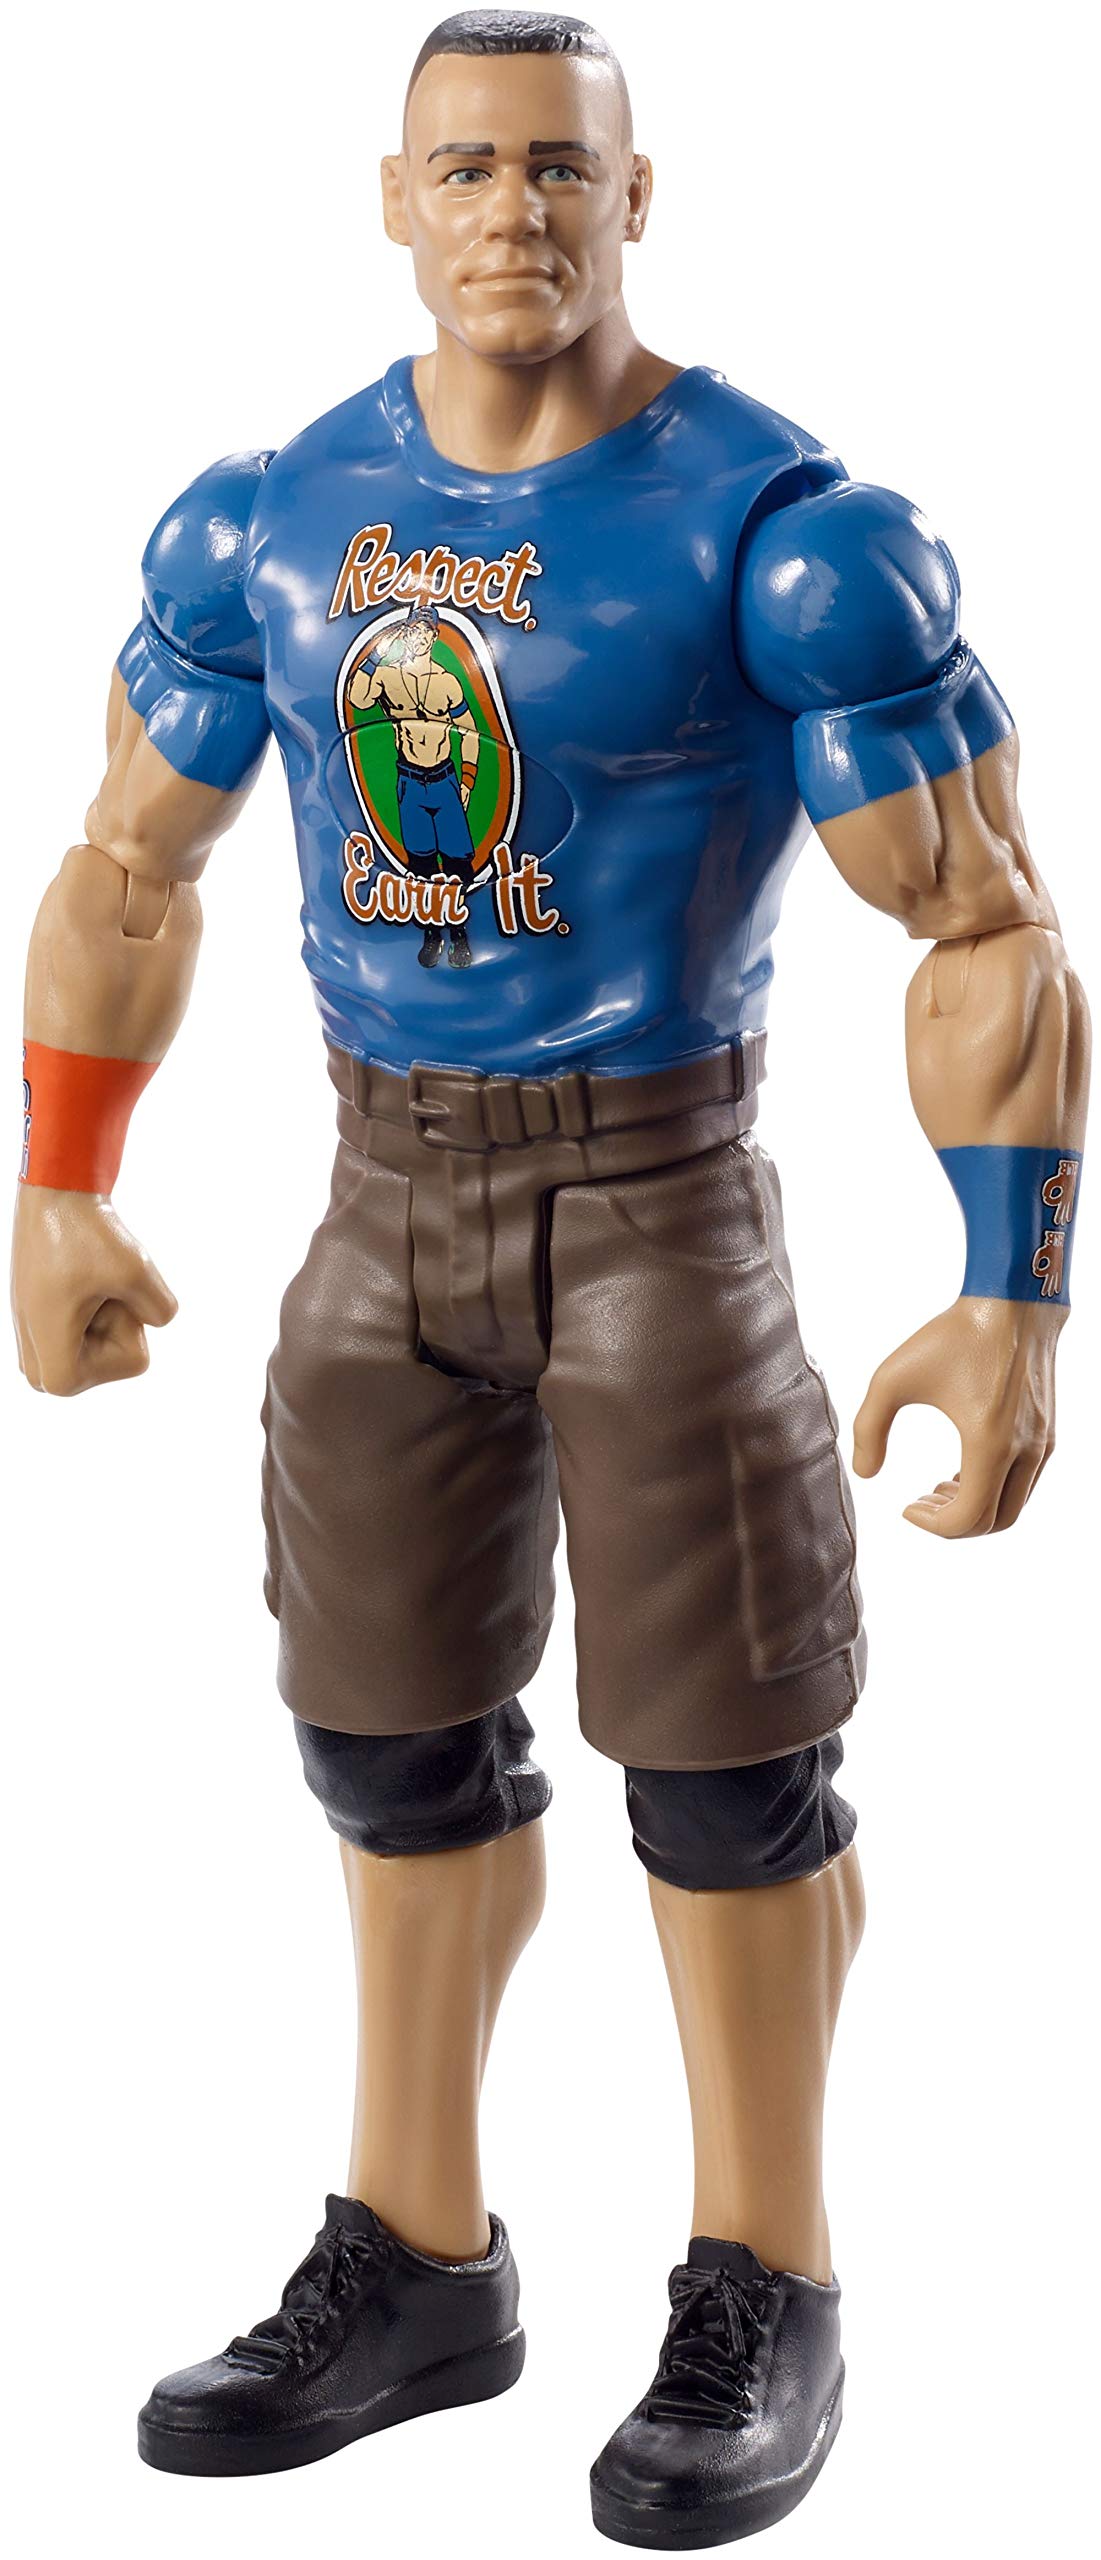 Other Action Figures Wwe Tough Talkers Innovation John Cena Redeco Figure Was Sold For R454 95 On 13 Mar At 21 03 By Papertown Africa In Outside South Africa Id 380211577 - action toy figures tagged roblox papertown africa